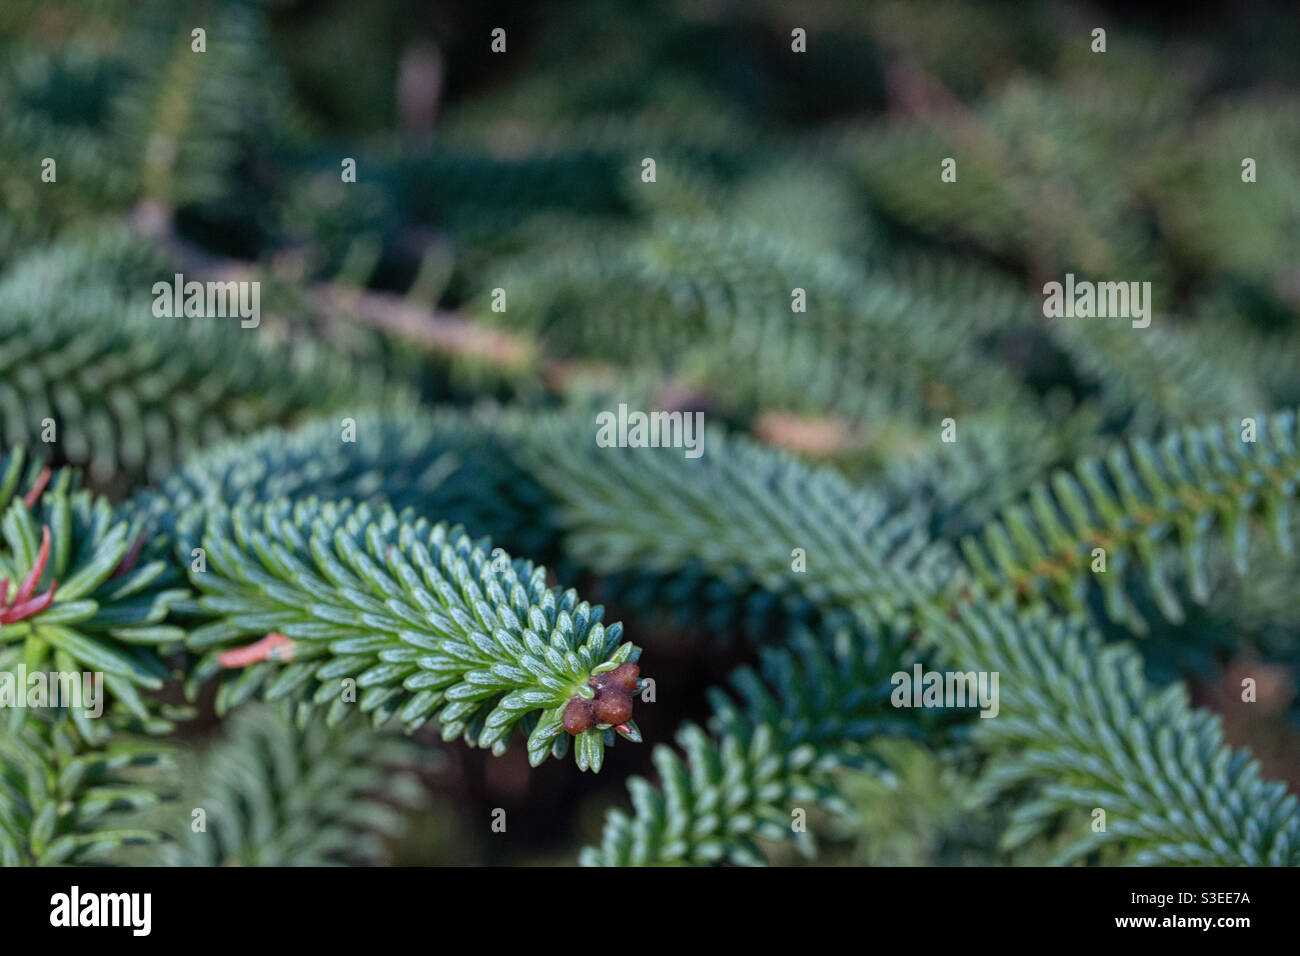 Closeup of some bluish/greenish branches of a Spruce tree Stock Photo